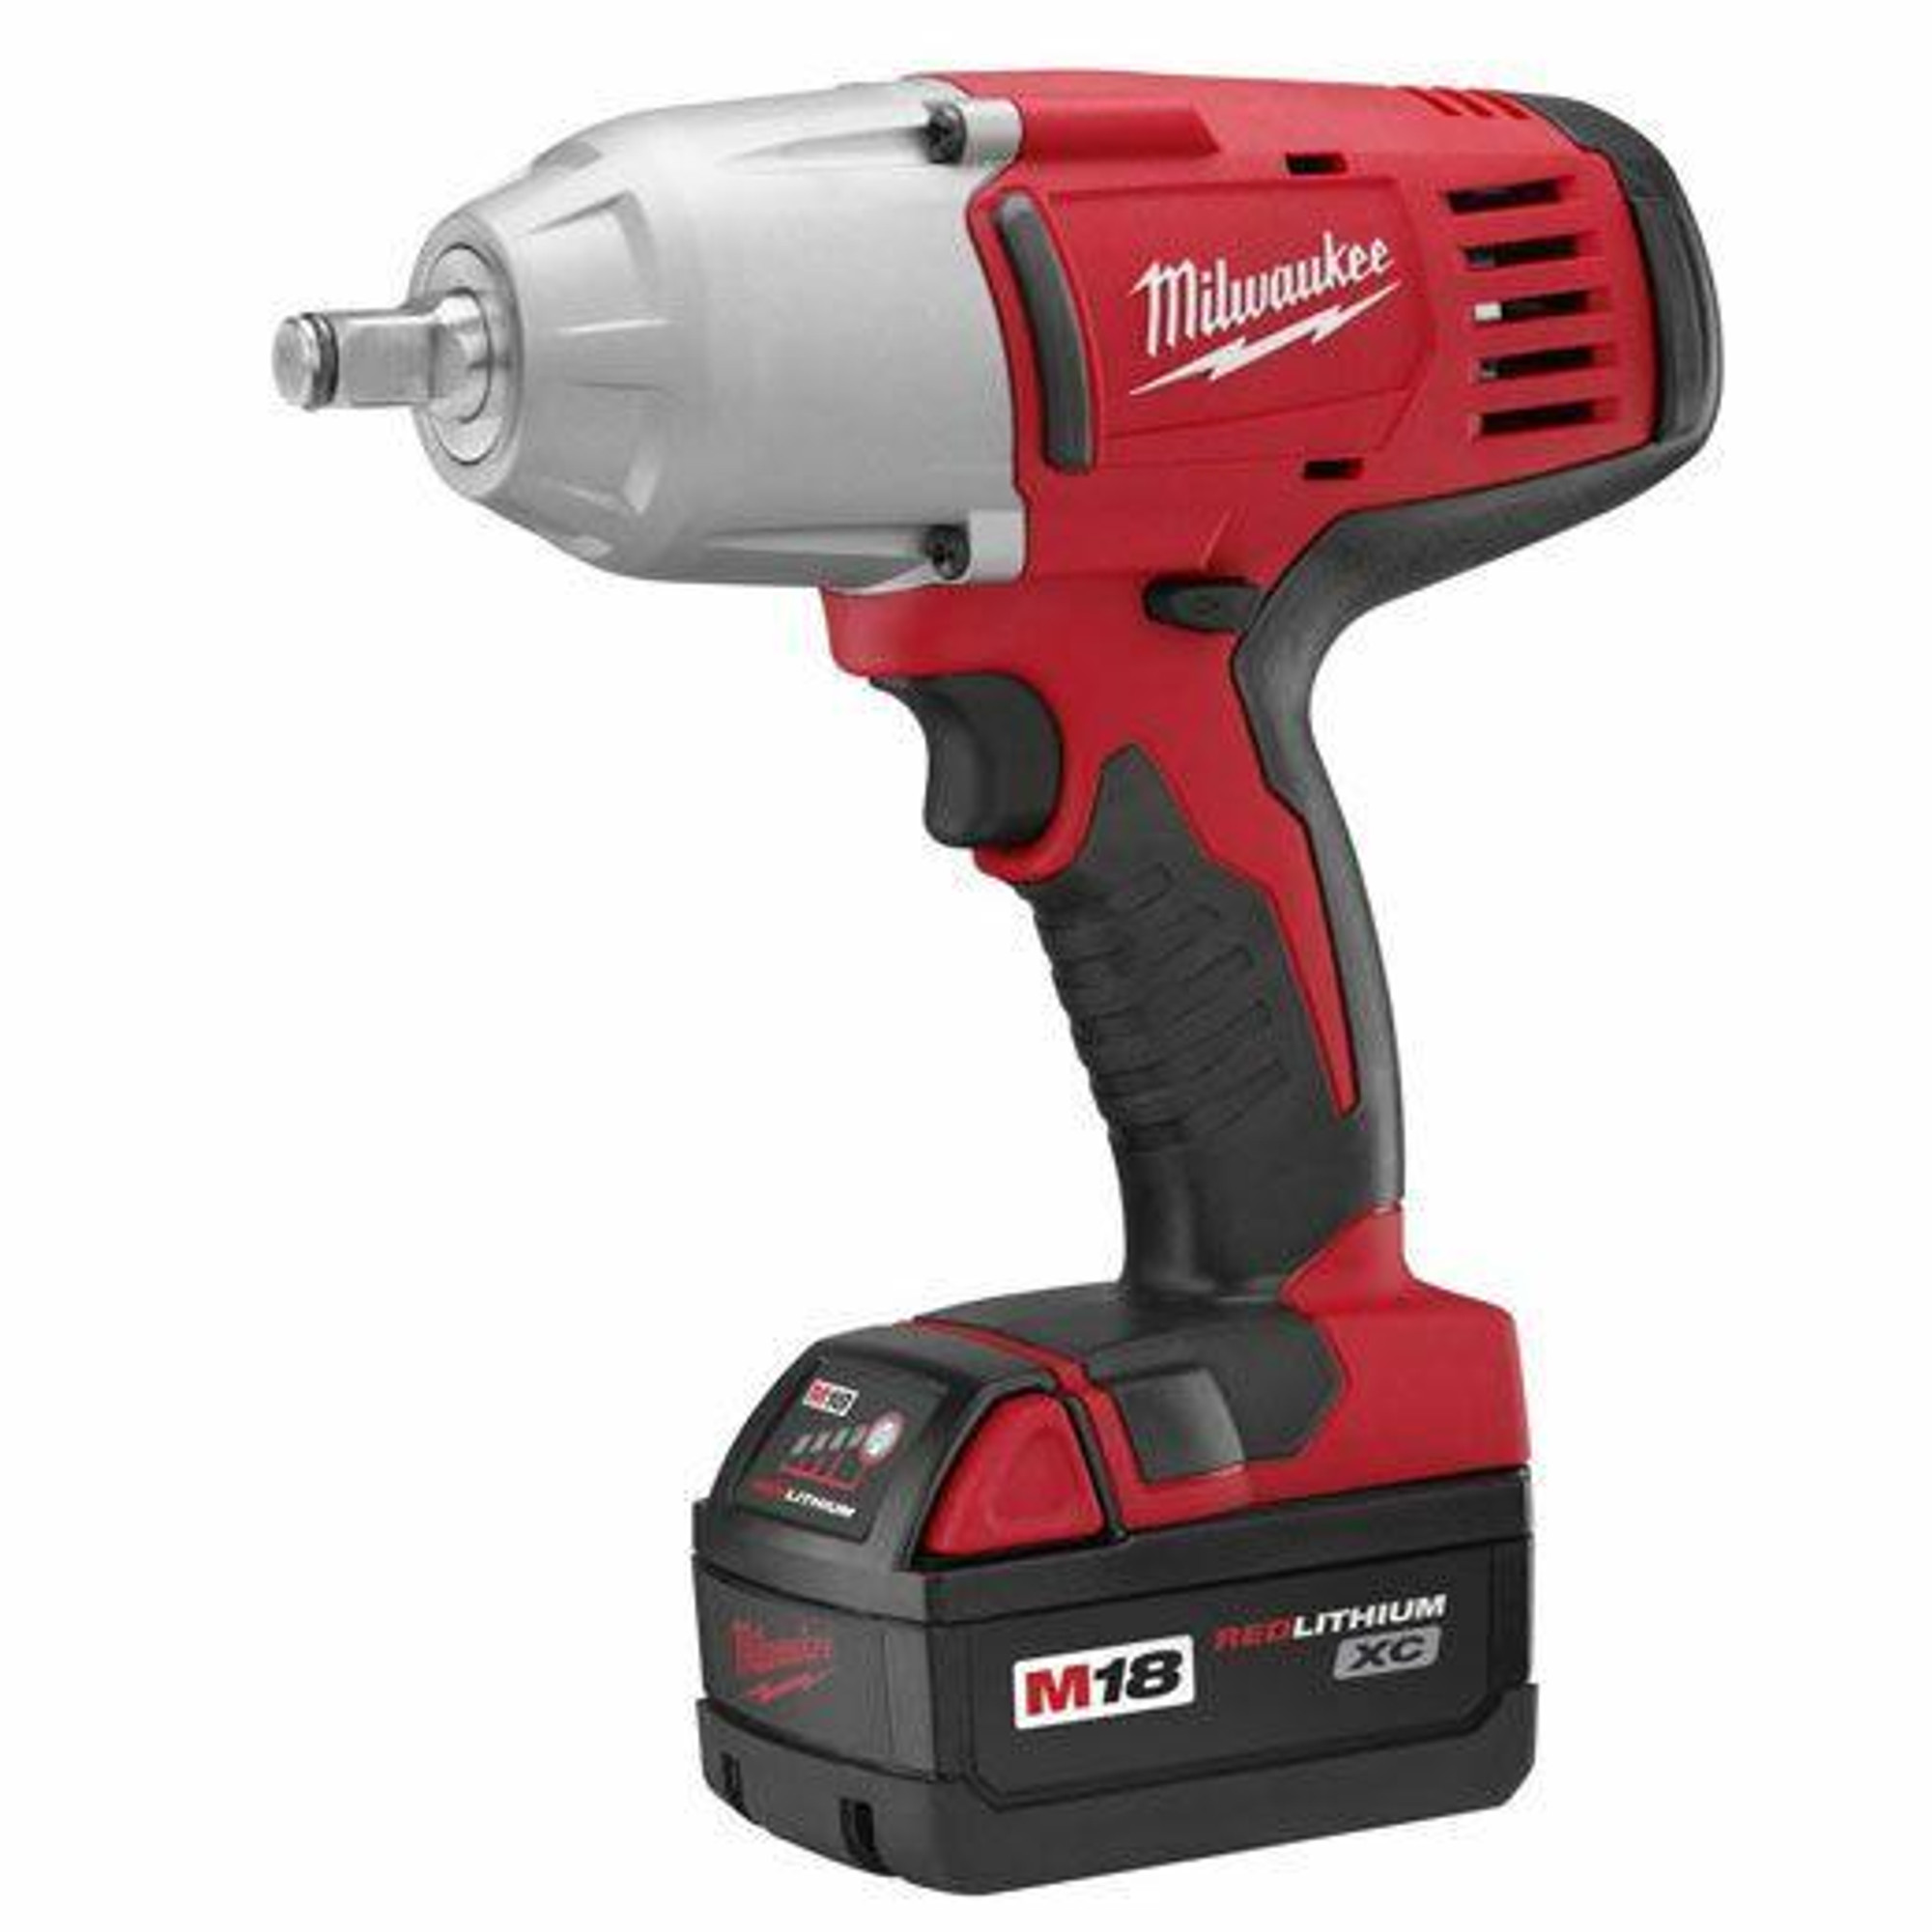 Milwaukee MILWAUKEE - M18 1/2 HIGH-TORQUE IMPACT WRENCH WITH FRICTION RING KIT